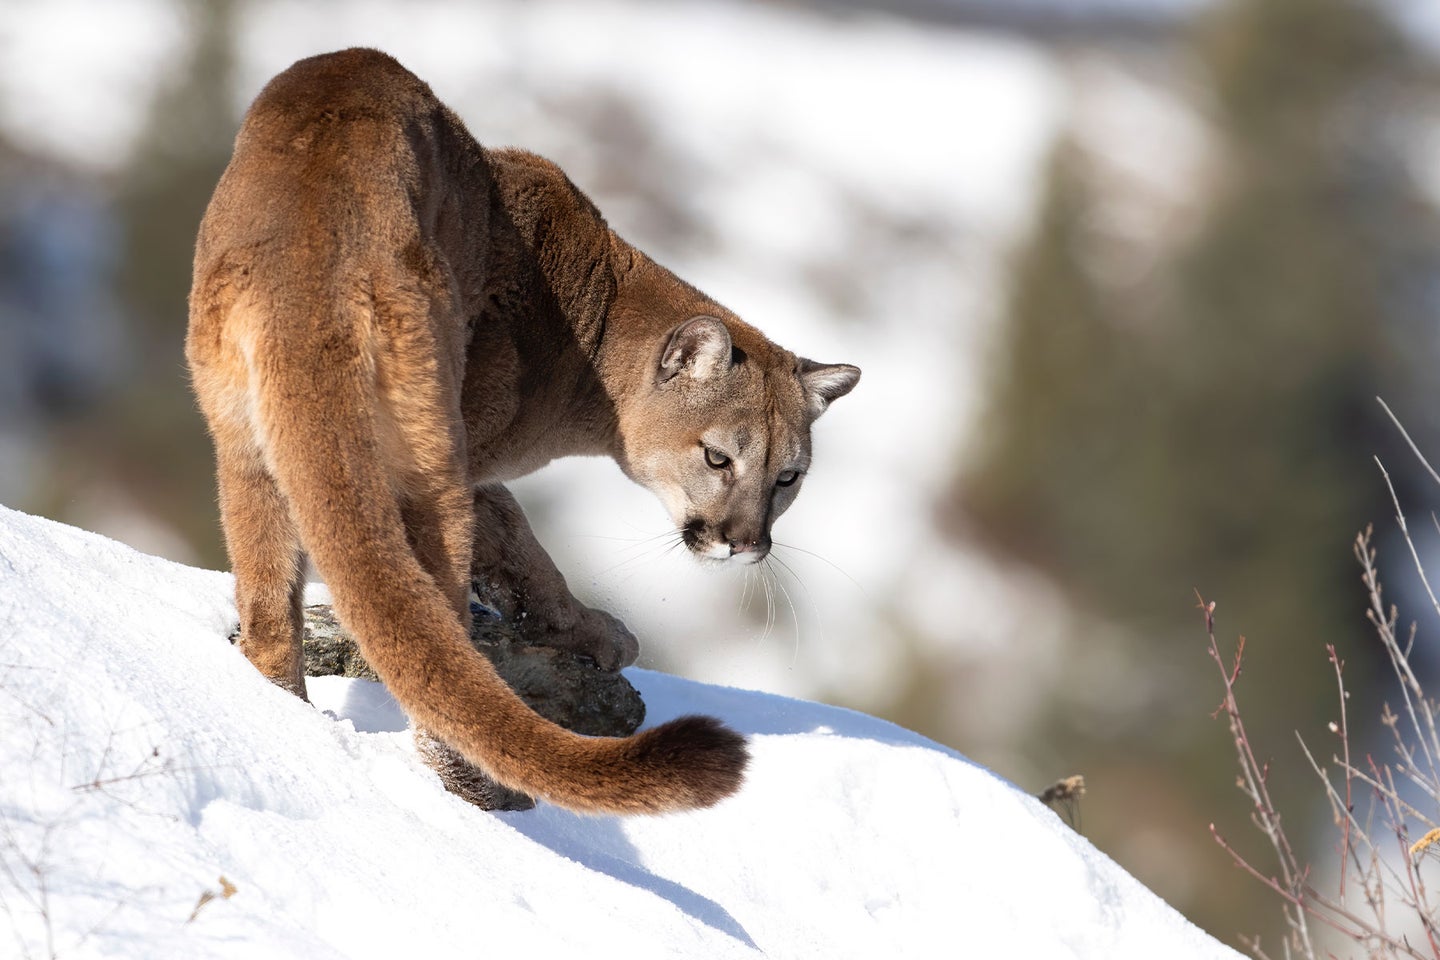 An adult mountain lion stands on a snowy mountainside.